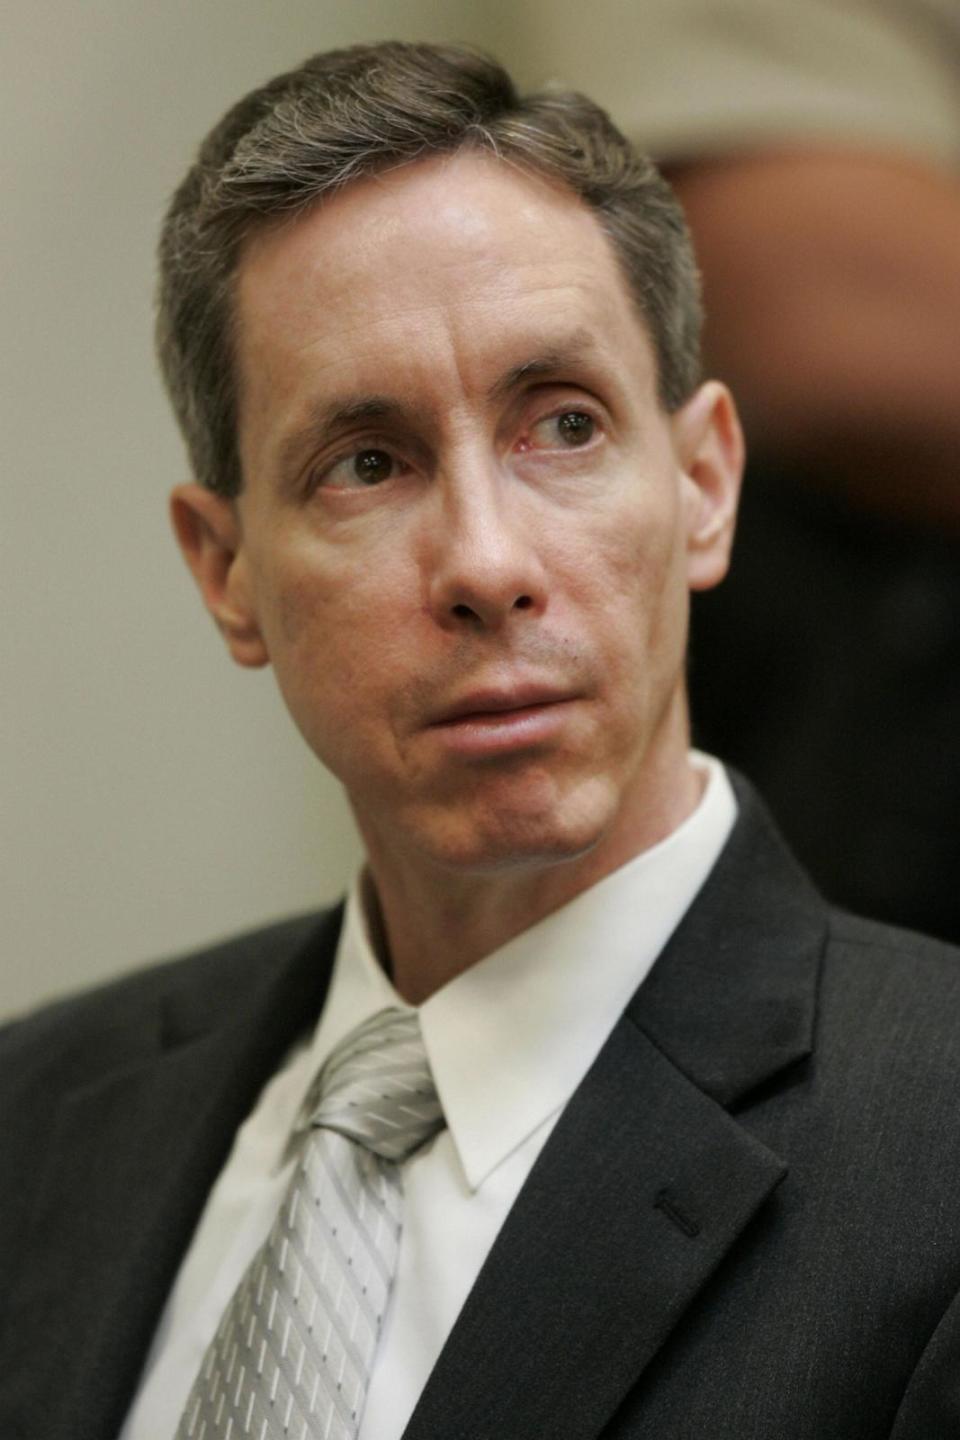 PHOTO: Warren Jeffs watches his attorneys during a motion hearing before his trial, Sept. 13, 2007, in St. George, Utah.   (Douglas C. Pizac/AFP via Getty Images)